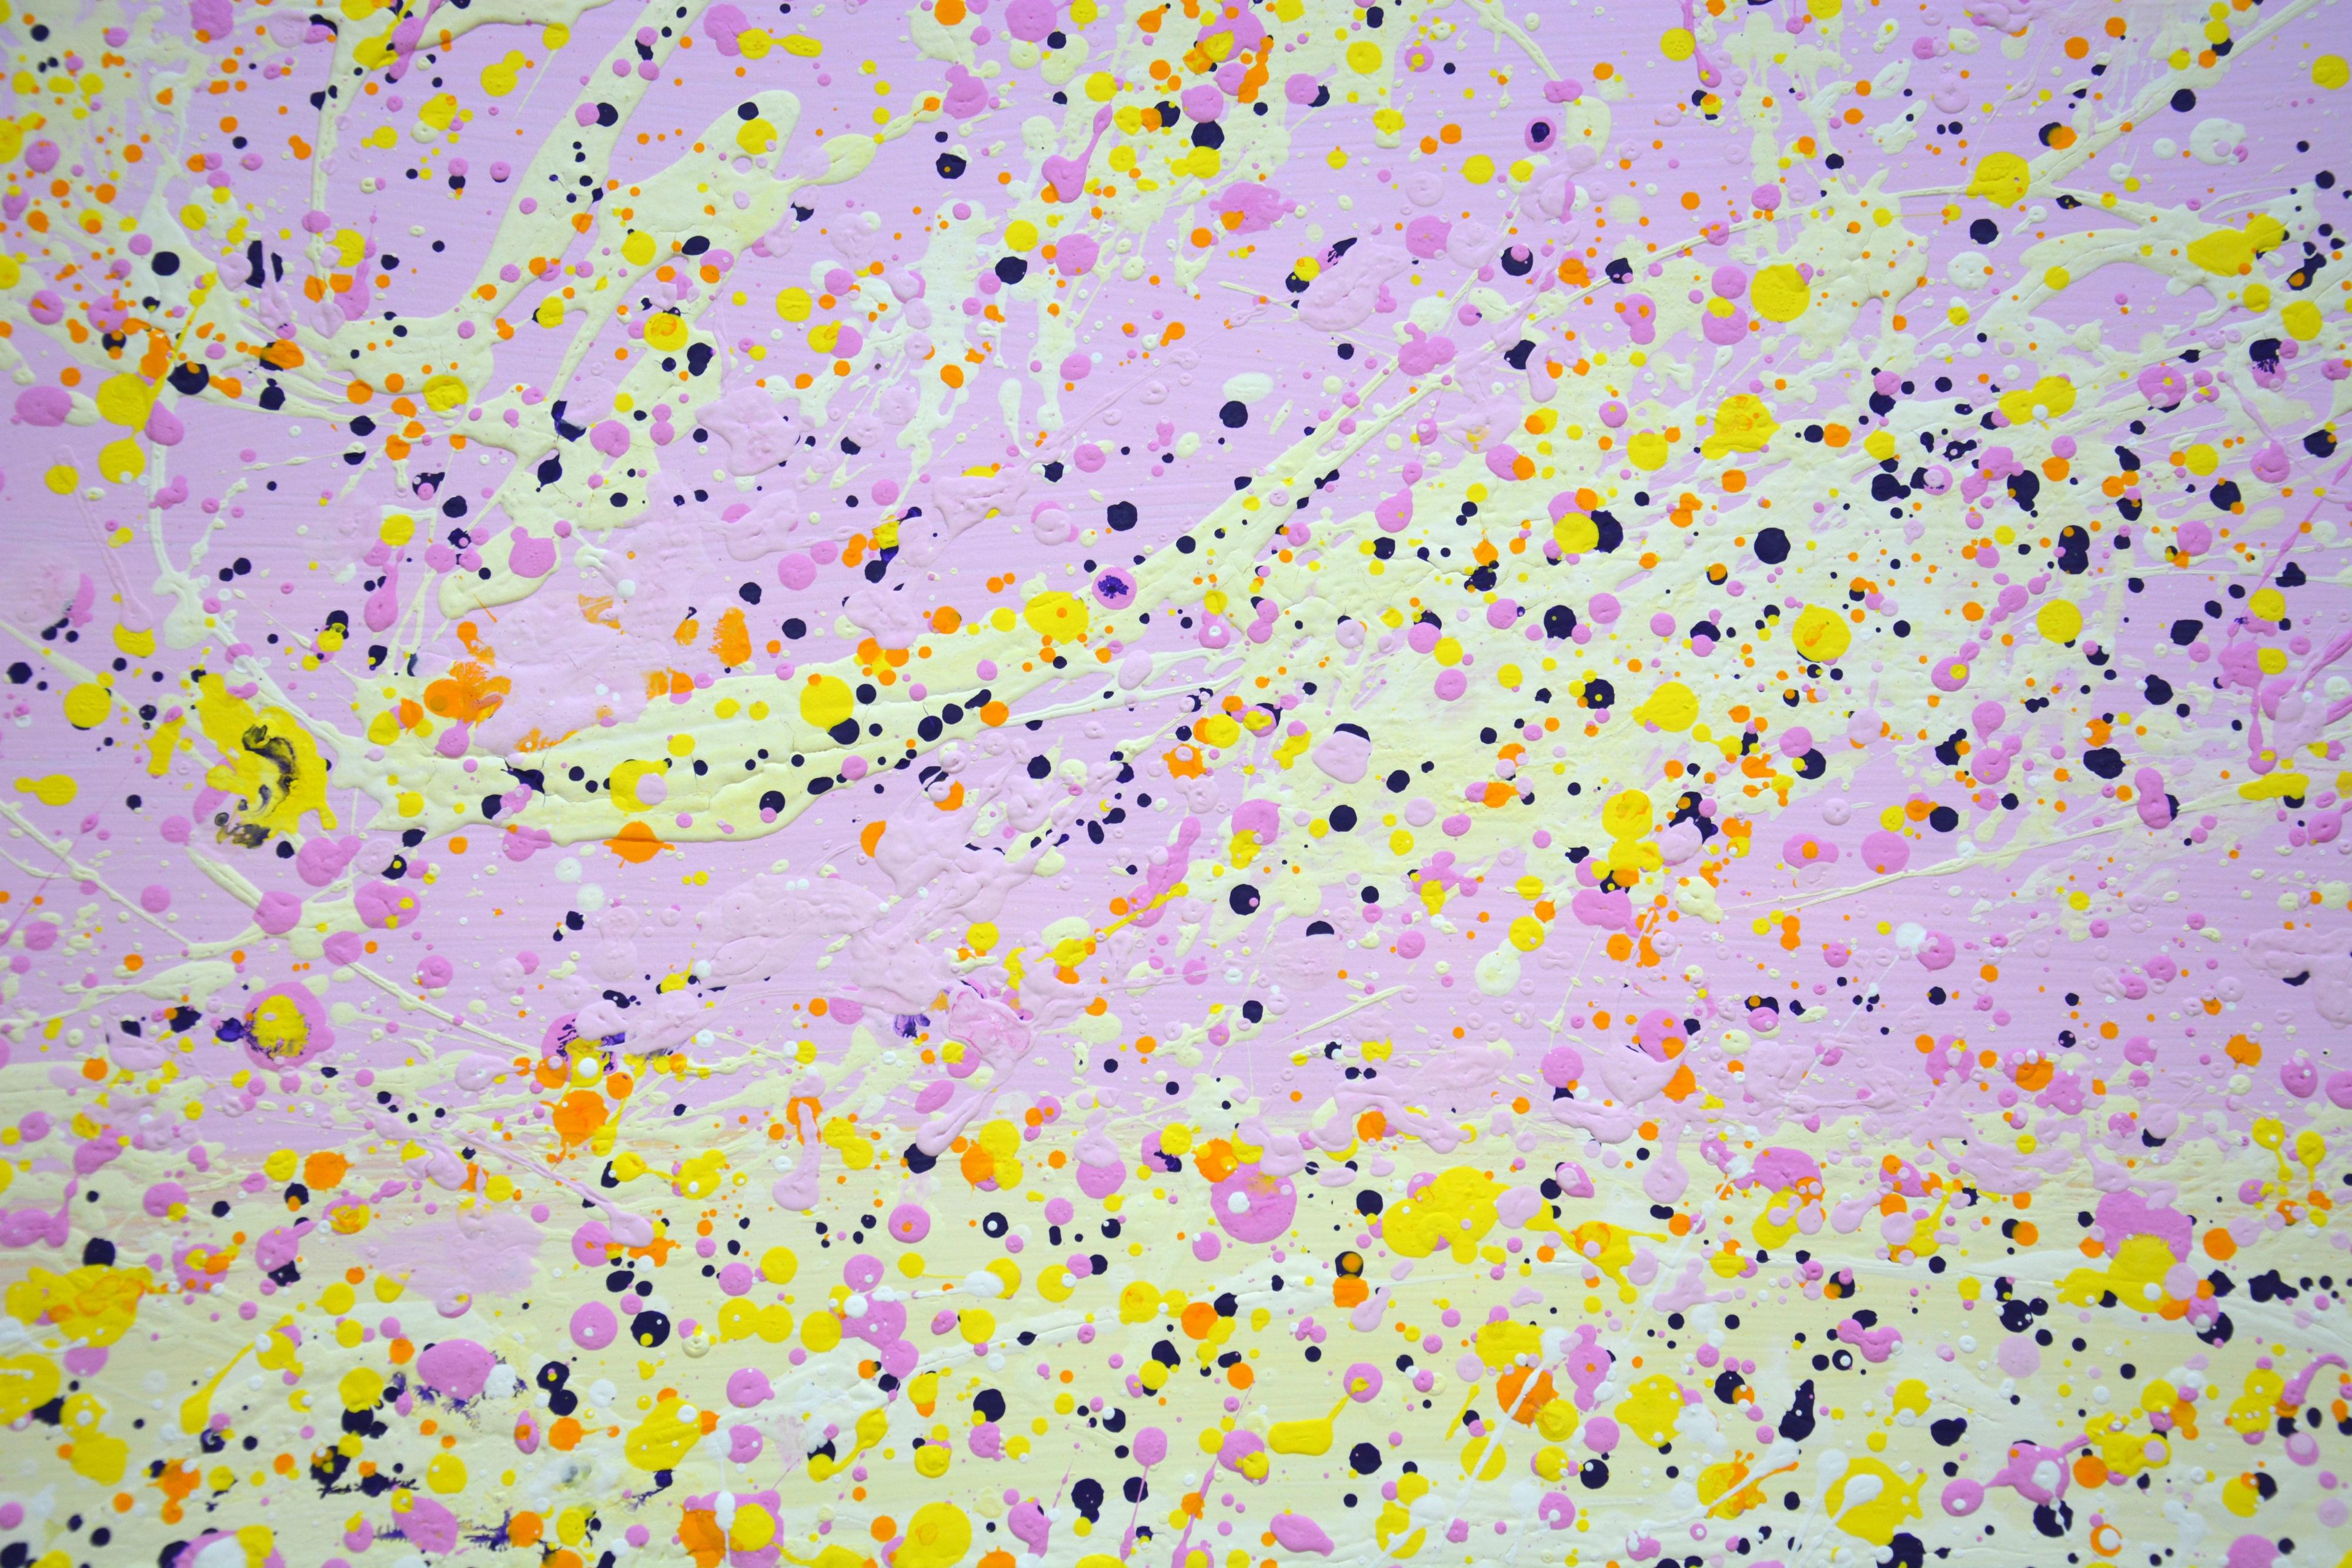 Light pink 3. A modern, abstract, expressive painting that has glitter and shimmer! Many colored drops, pink, white on a light pink and yellow background.
Feelings of joy, love and happiness. The picture is of good spatial quality, filled with